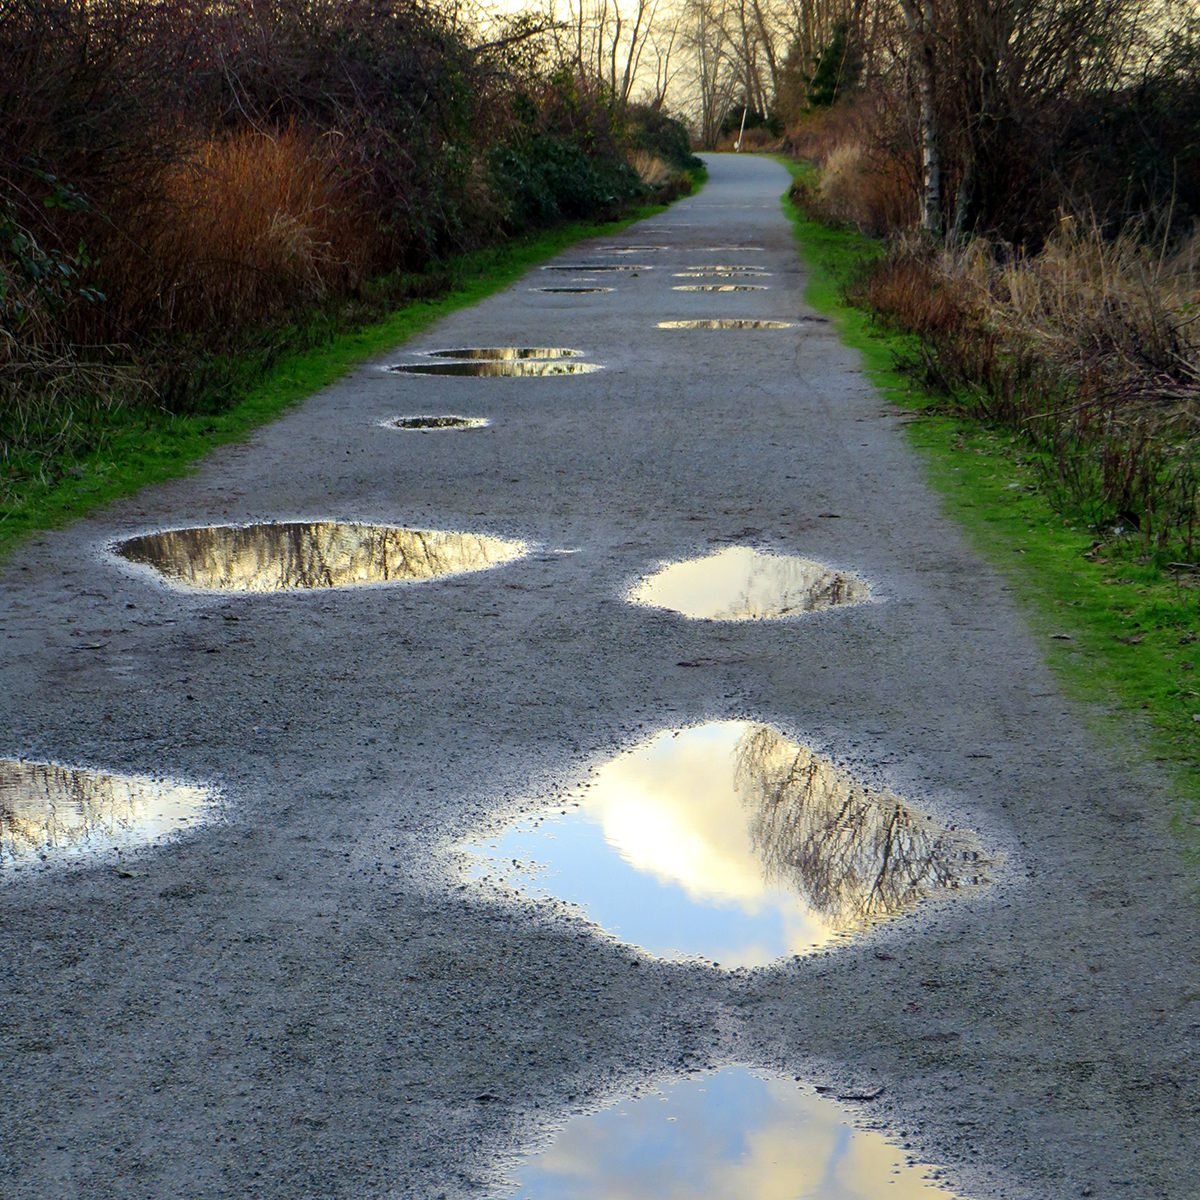 My Happy Place - lane filled with puddles